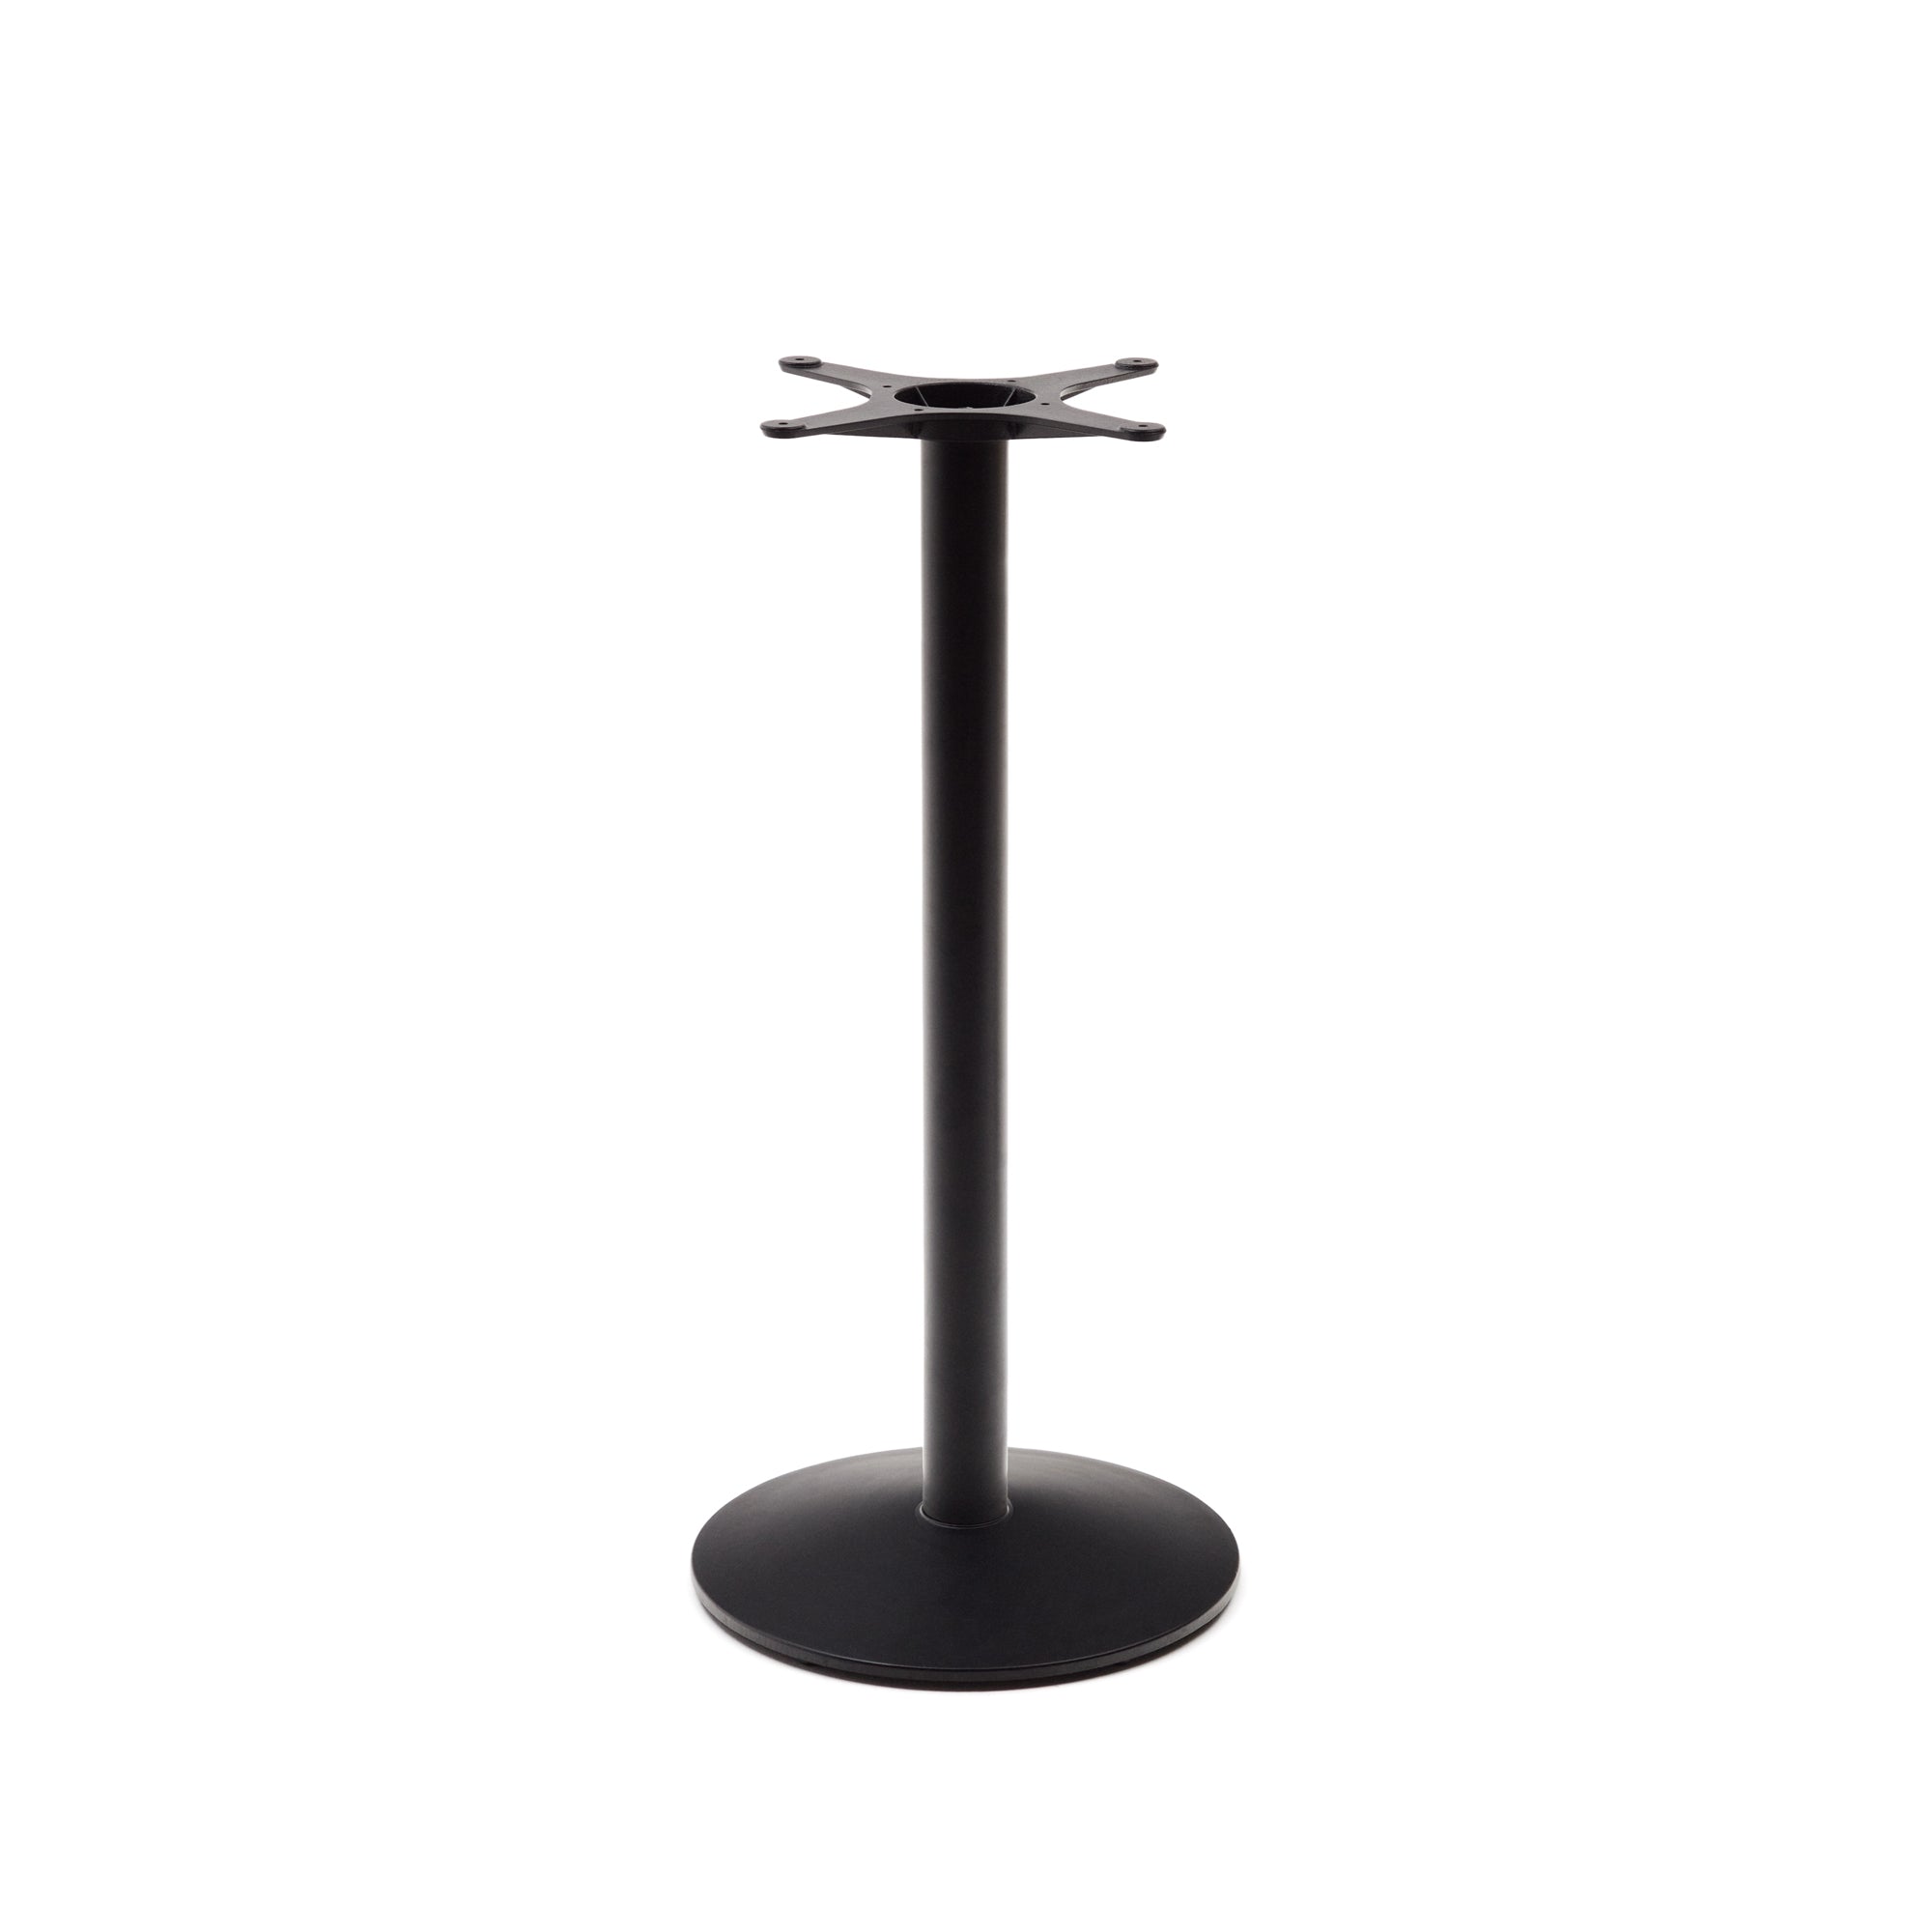 Esilda high bar-table leg with round metal base in a painted black finish